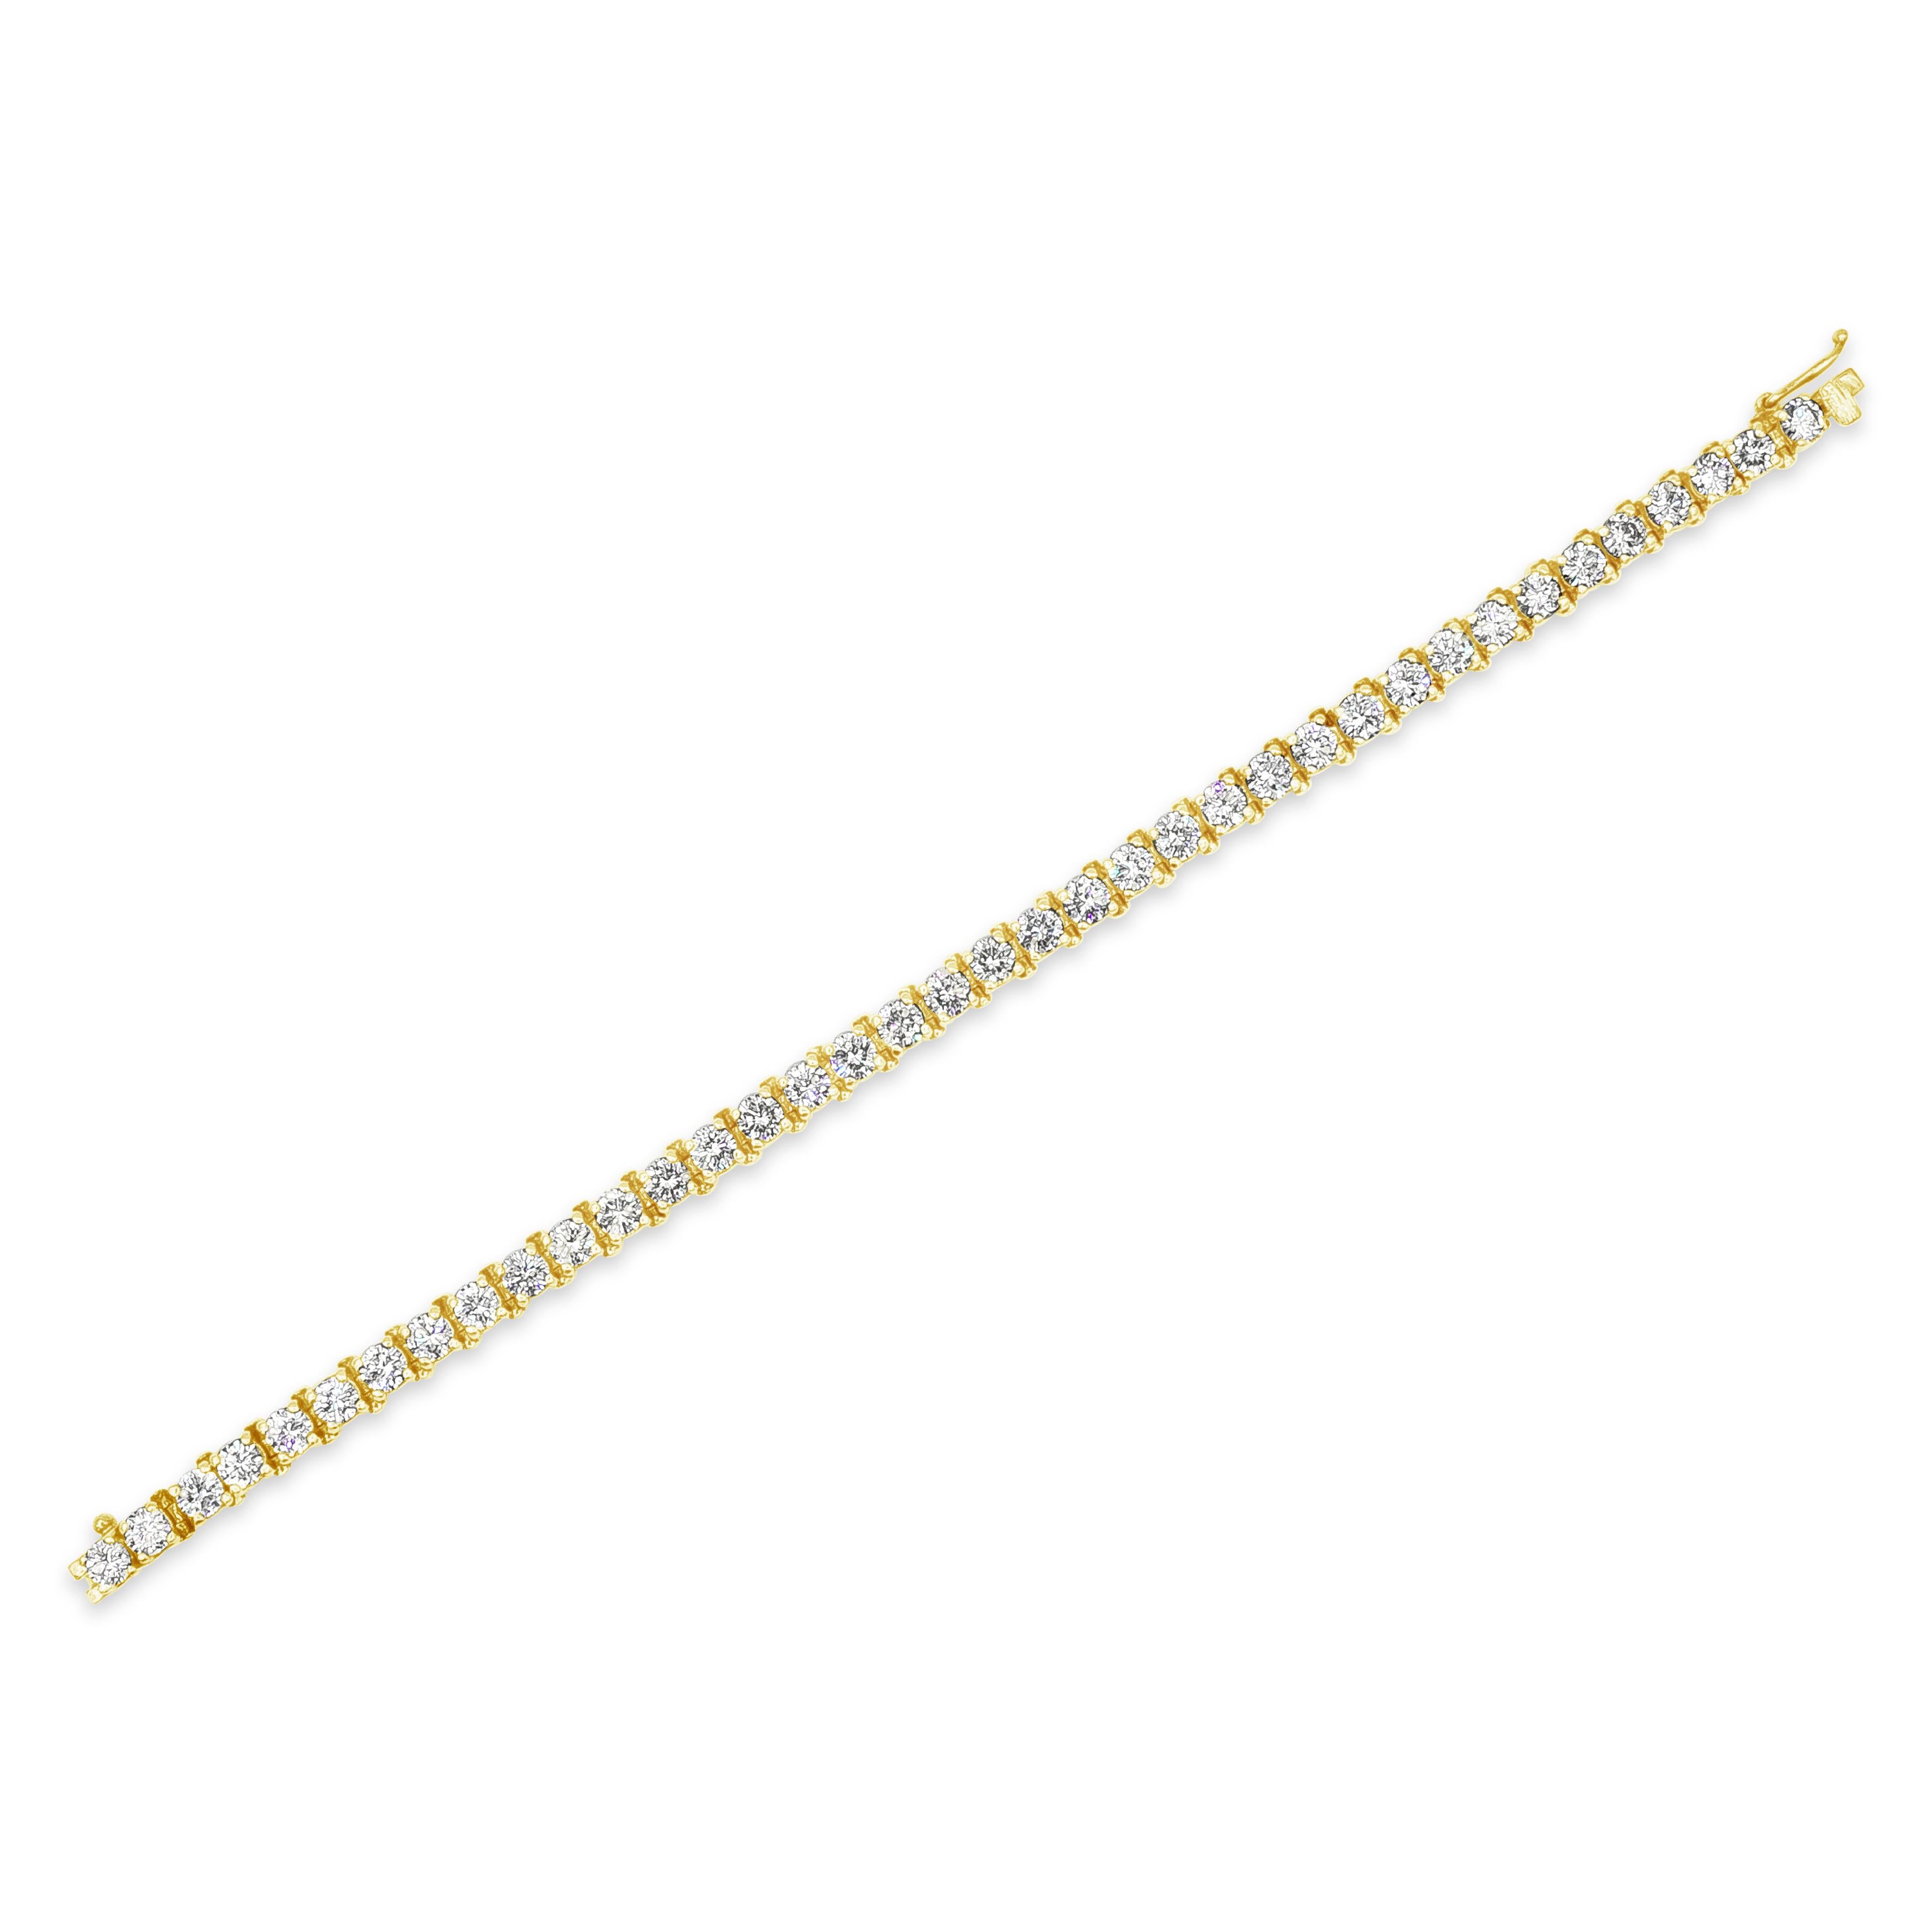 A classic and simple tennis bracelet style featuring a row of round brilliant diamonds weighing 11.00 carats total, G+ Color and VS+ in Clarity. Set in a four-prong basket setting. Made in 14K Yellow Gold and 7 inches in Length.

Roman Malakov is a